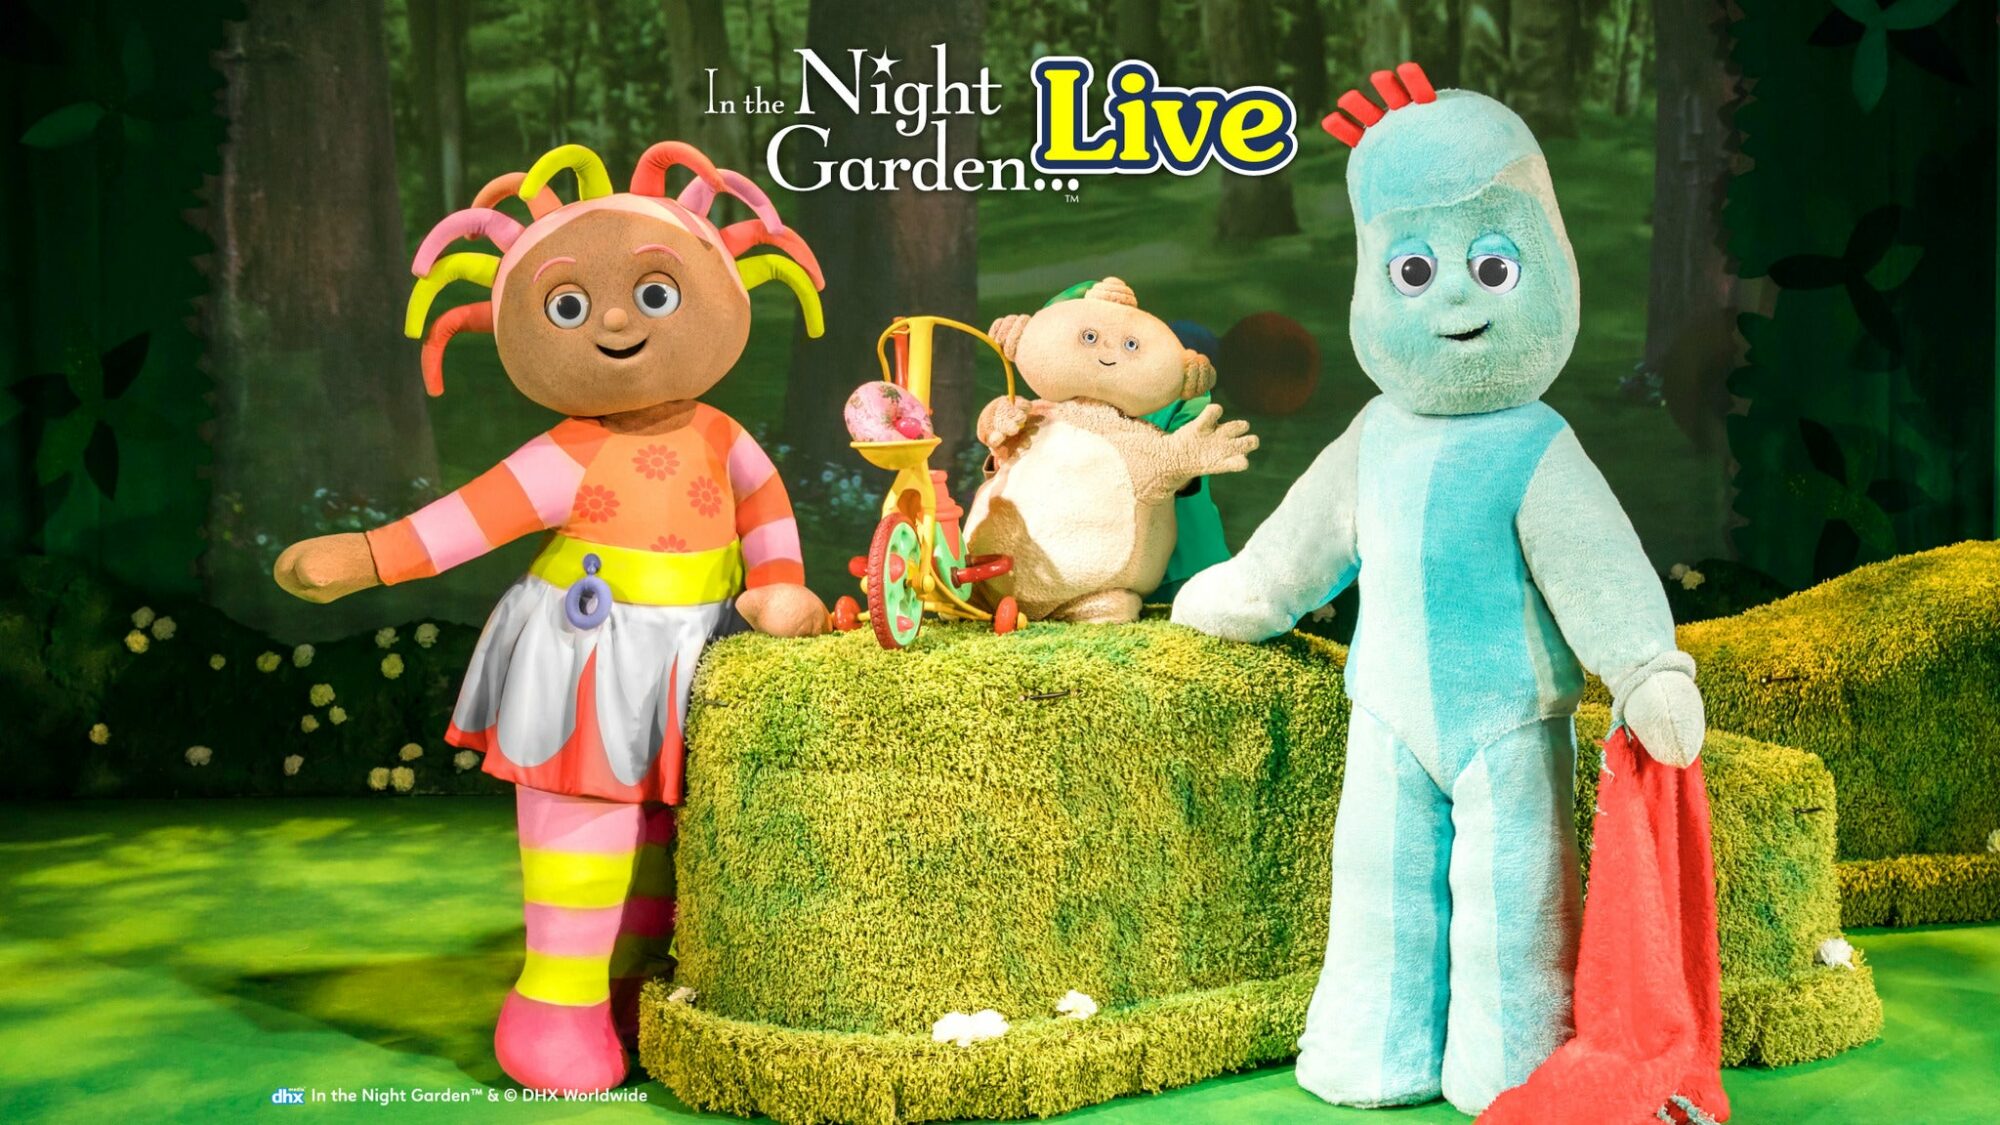 Image name In the Night Garden Live at Scarborough Spa Grand Hall Scarborough the 1 image from the post In the Night Garden Live at Scarborough Spa Grand Hall, Scarborough in Yorkshire.com.